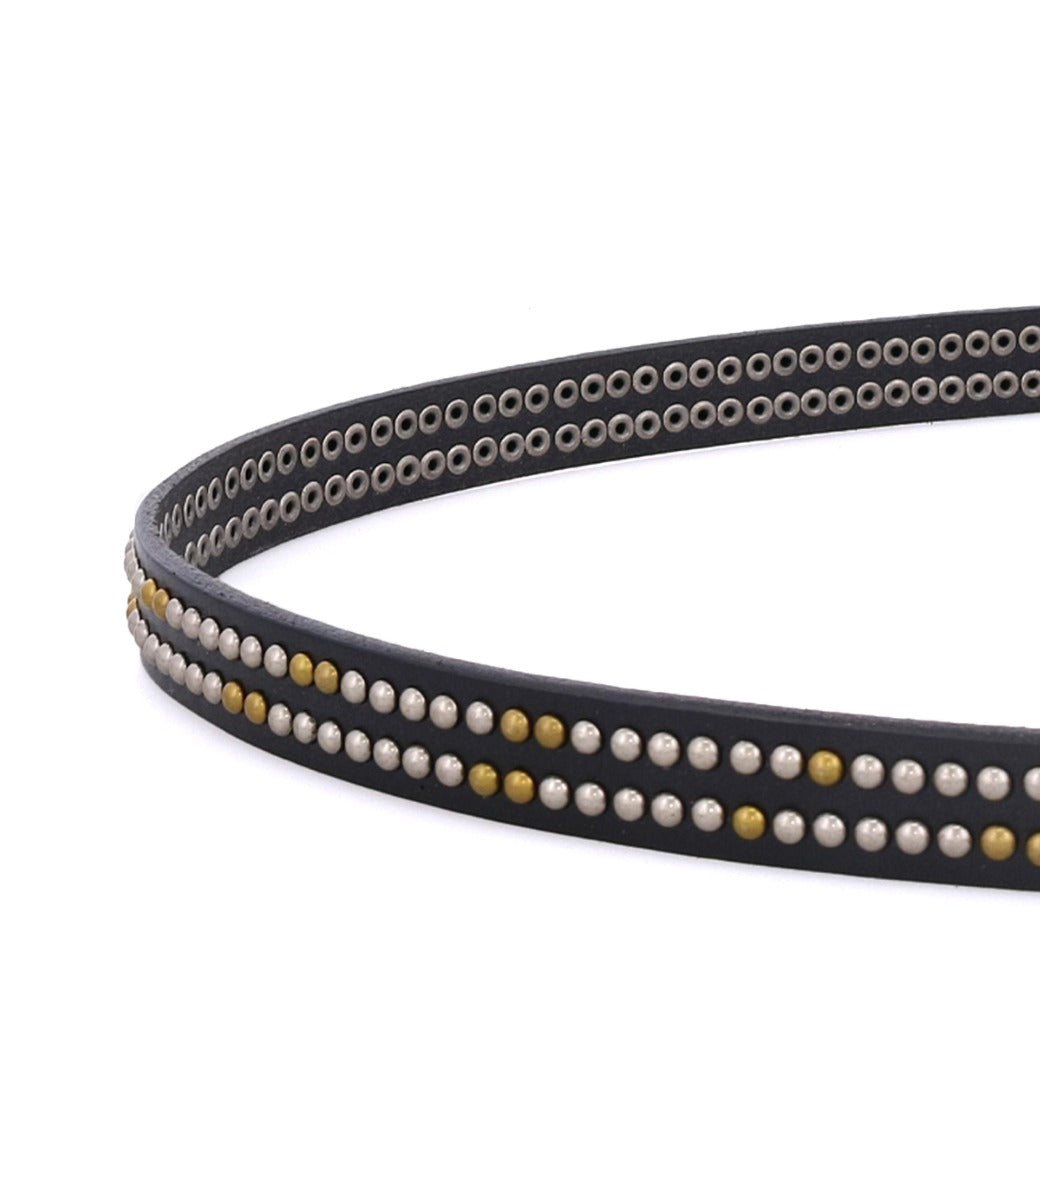 A Rico black leather belt with gold studs by Bed Stu.